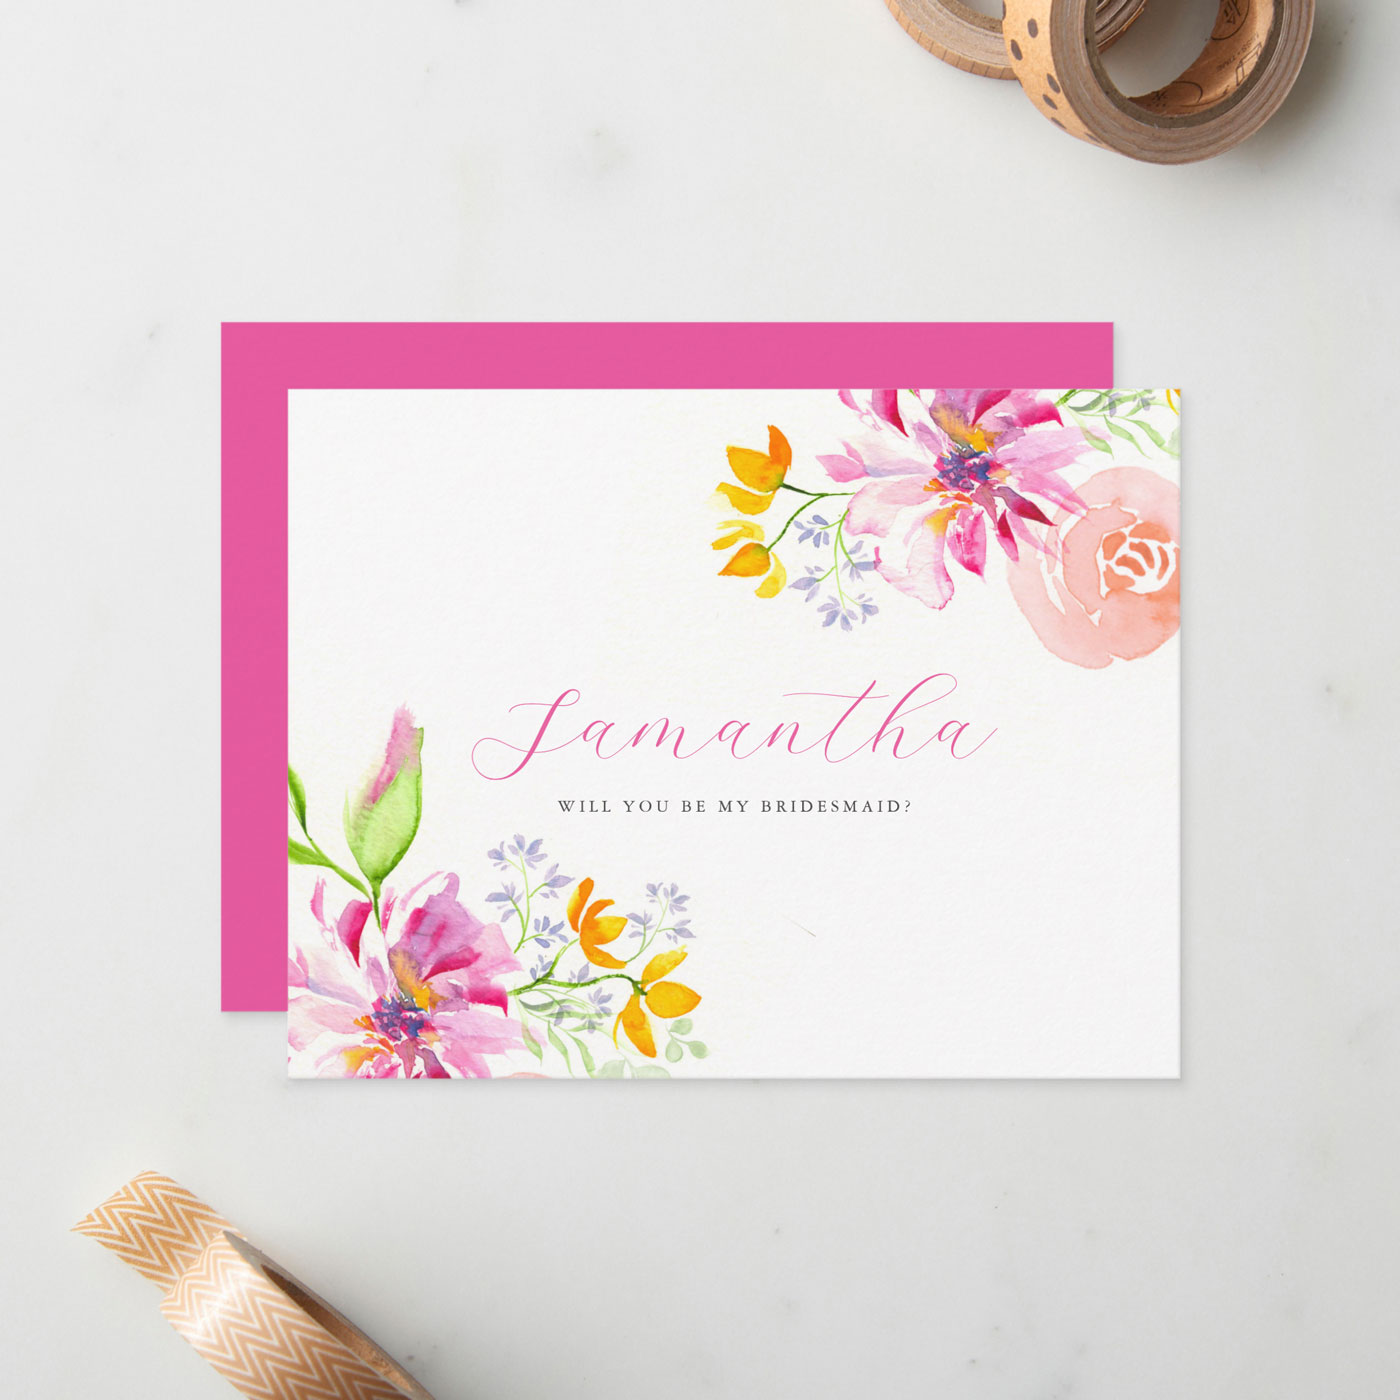 Bridesmaid proposal cards feature watercolor floral are in shades of pink, lavender and orange by Victoria Grigaliunas. Click the image to shop the complete theme. 